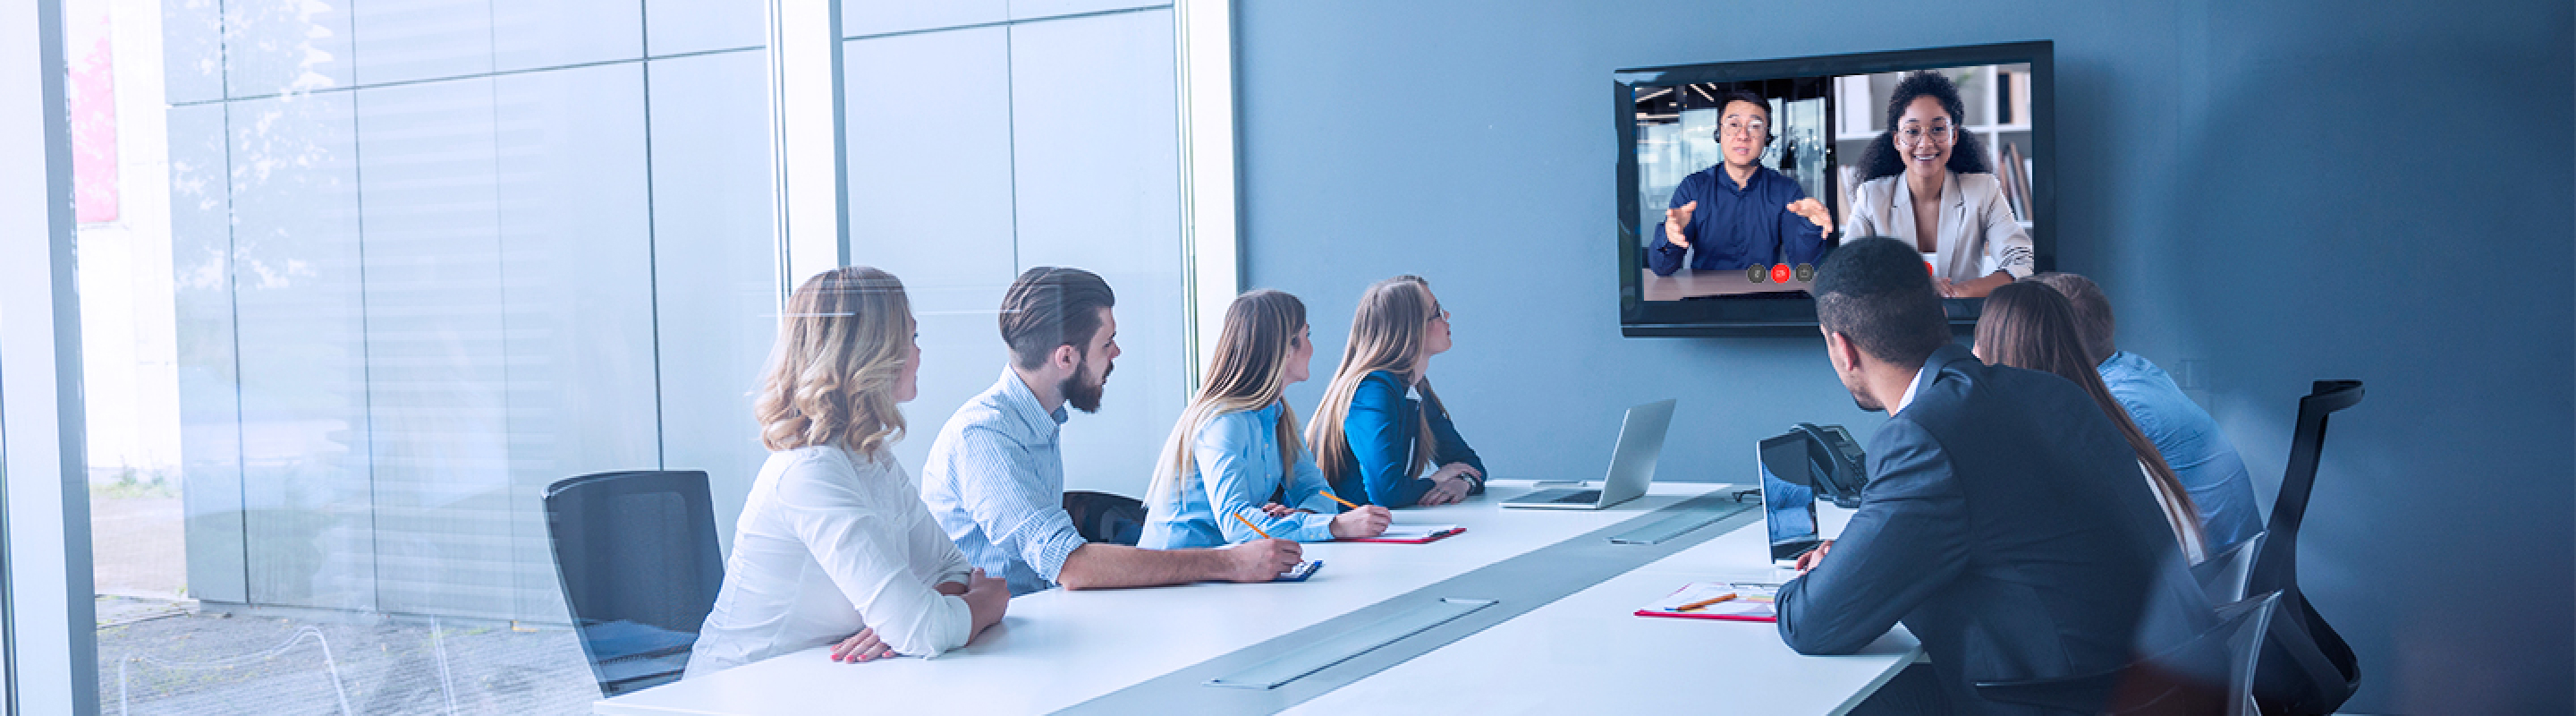 Colleagues in an office maintaining productivity by connecting with remote workers on a video call using a voice and collaboration solution from Bell.